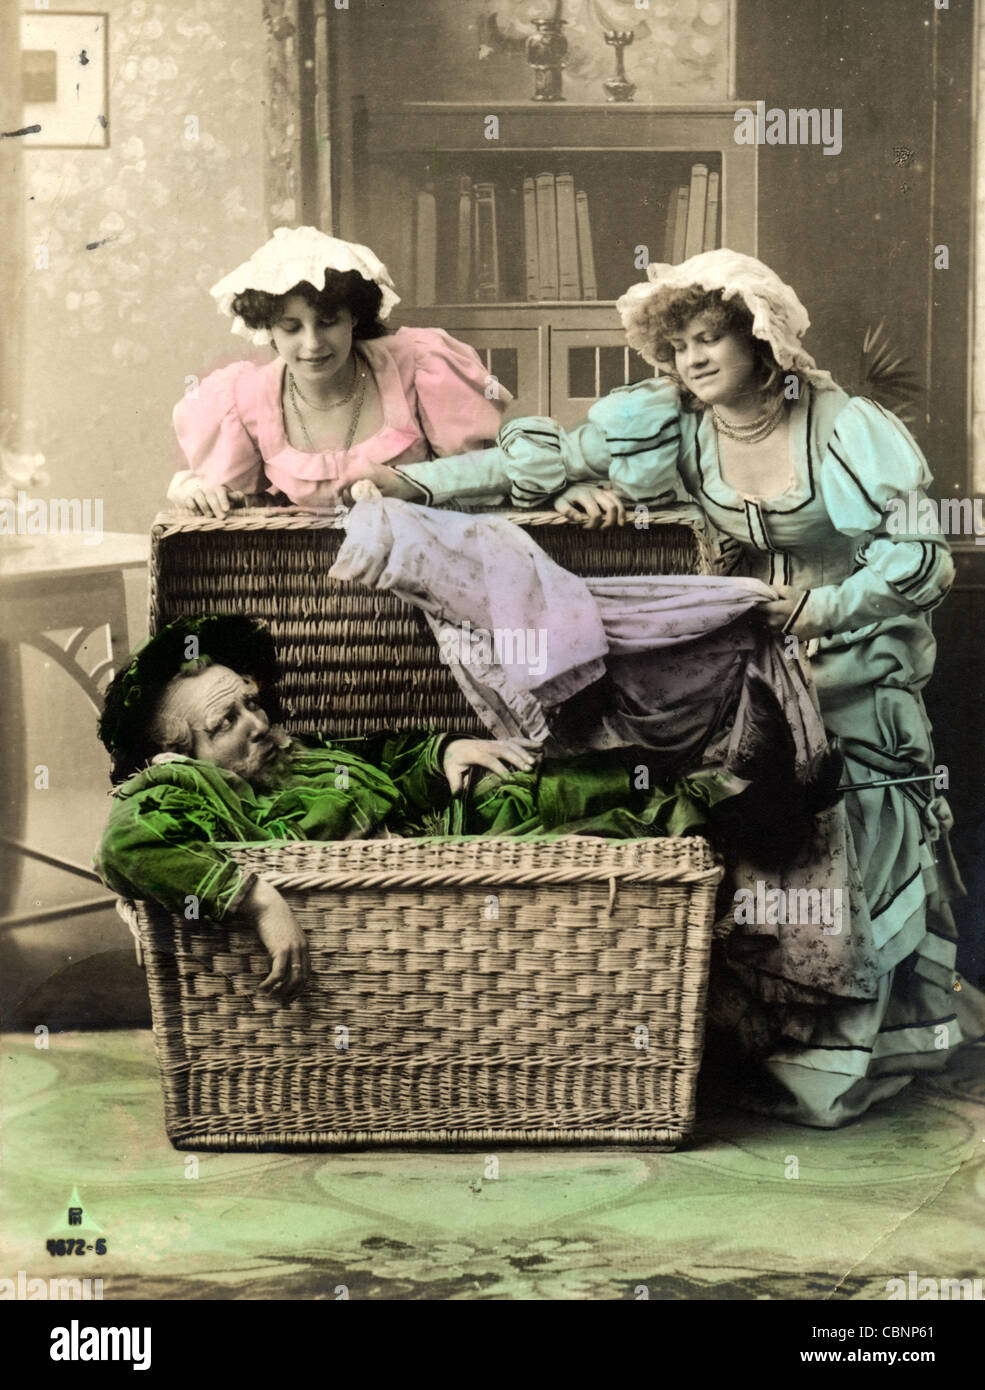 two-young-women-pack-old-man-in-steamer-trunk-CBNP61.jpg